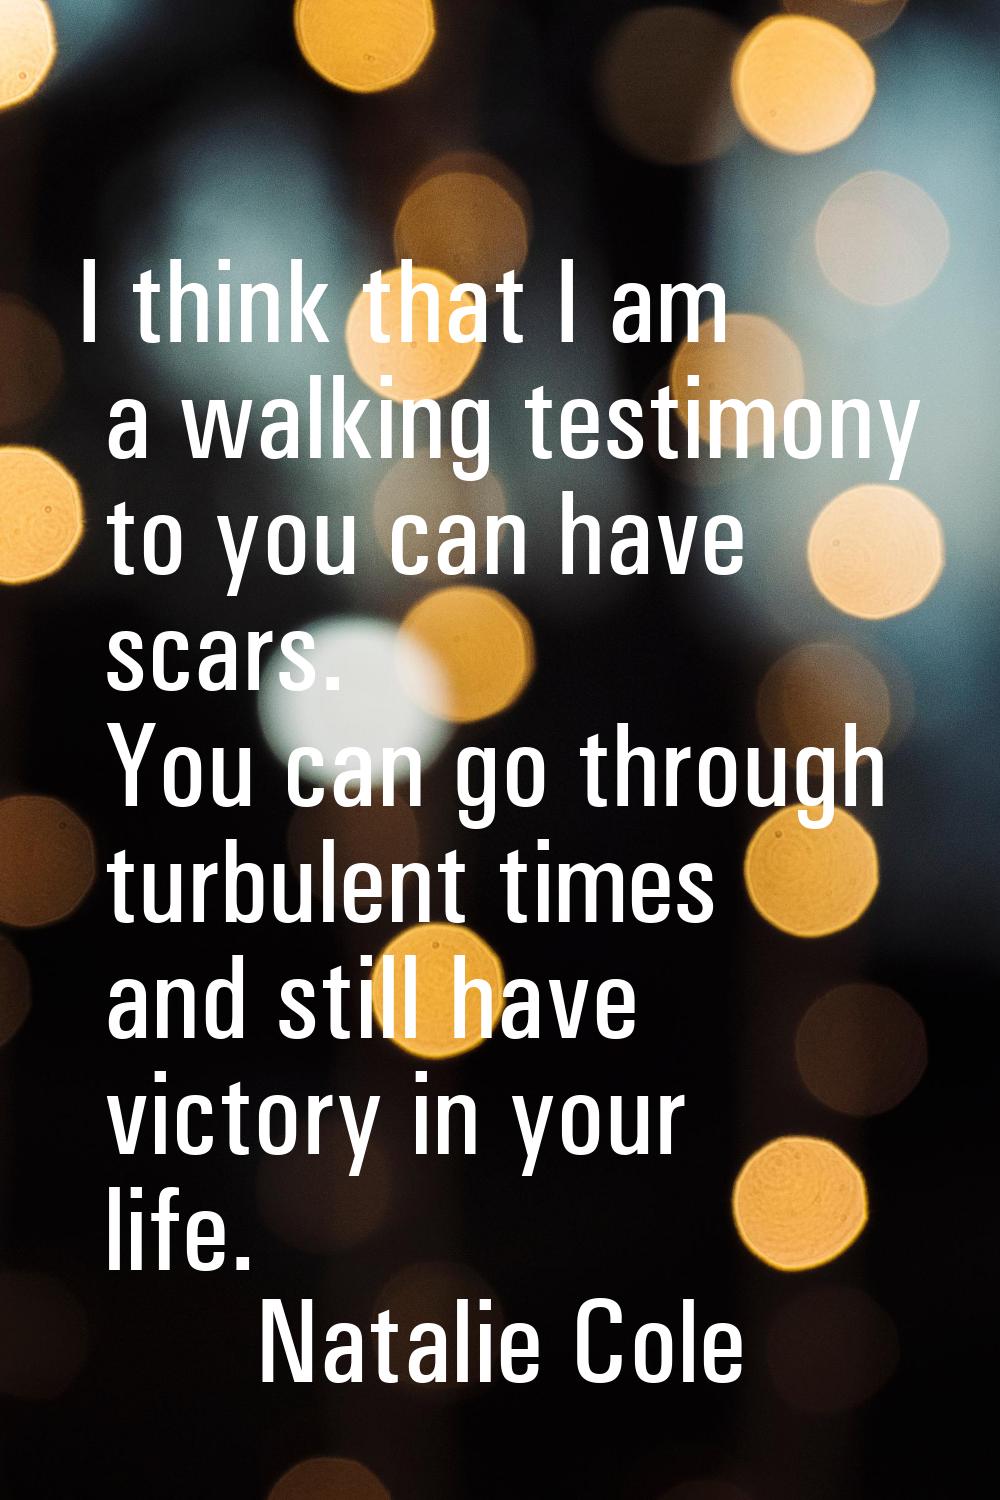 I think that I am a walking testimony to you can have scars. You can go through turbulent times and